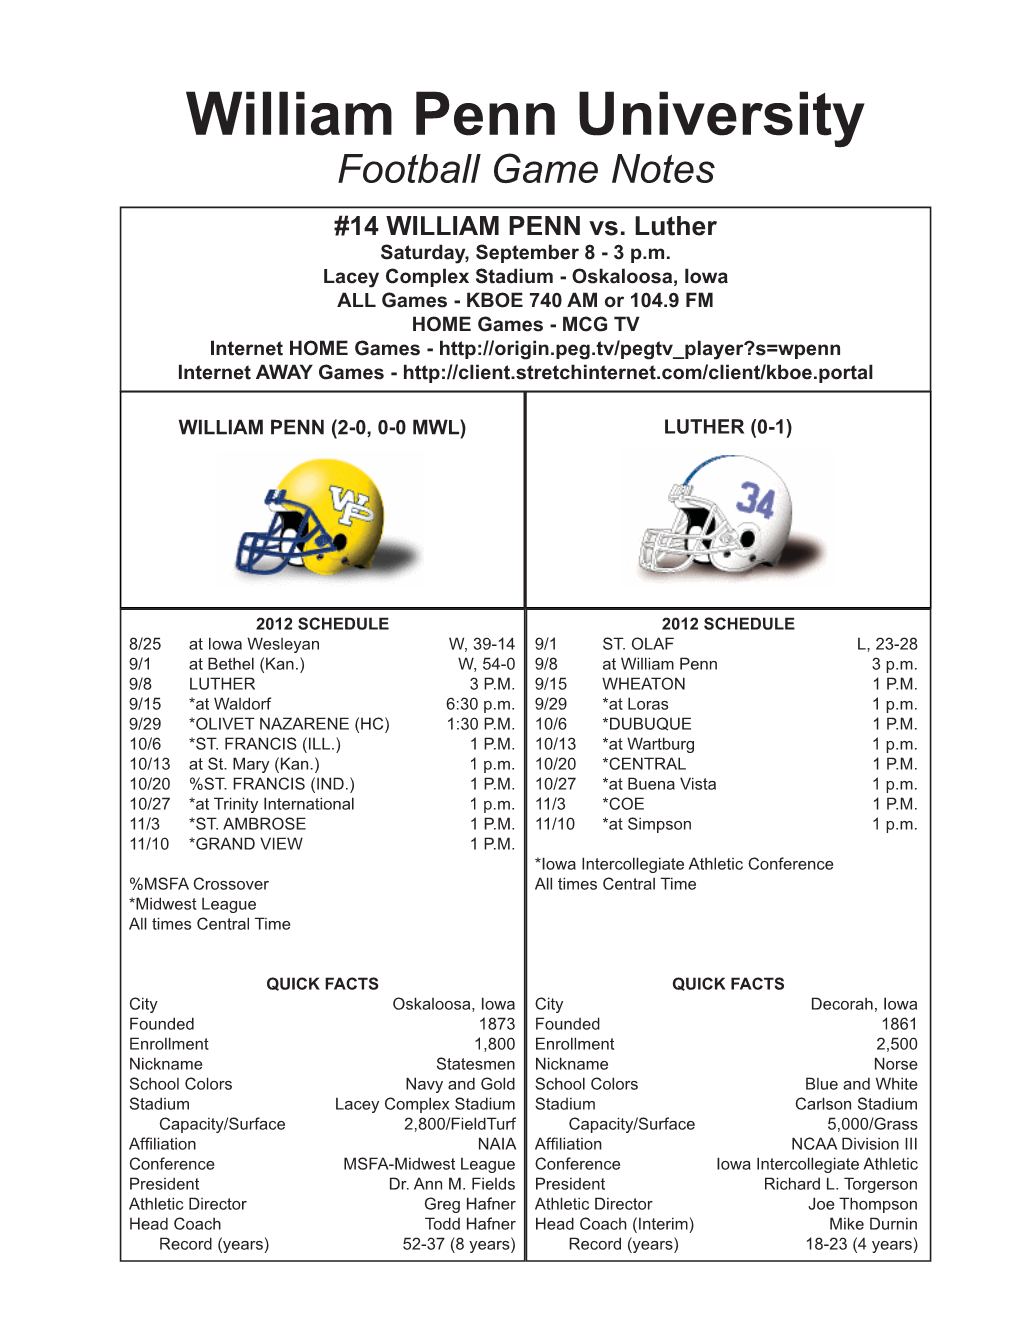 FB Game Notes.Indd